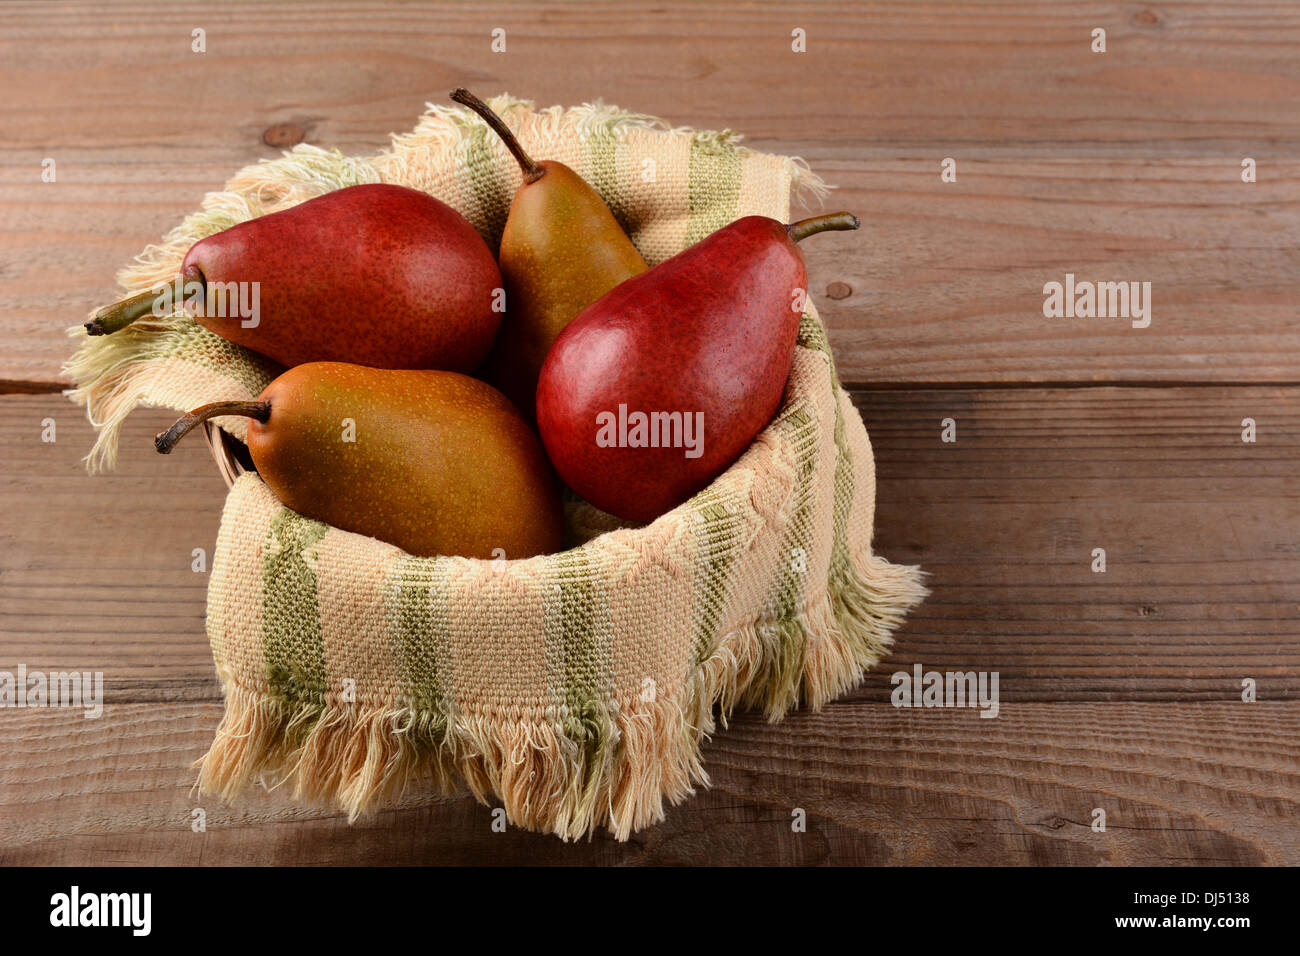 Bosc and Red Pears in a basket on a rustic wooden table. Horizontal format. Stock Photo